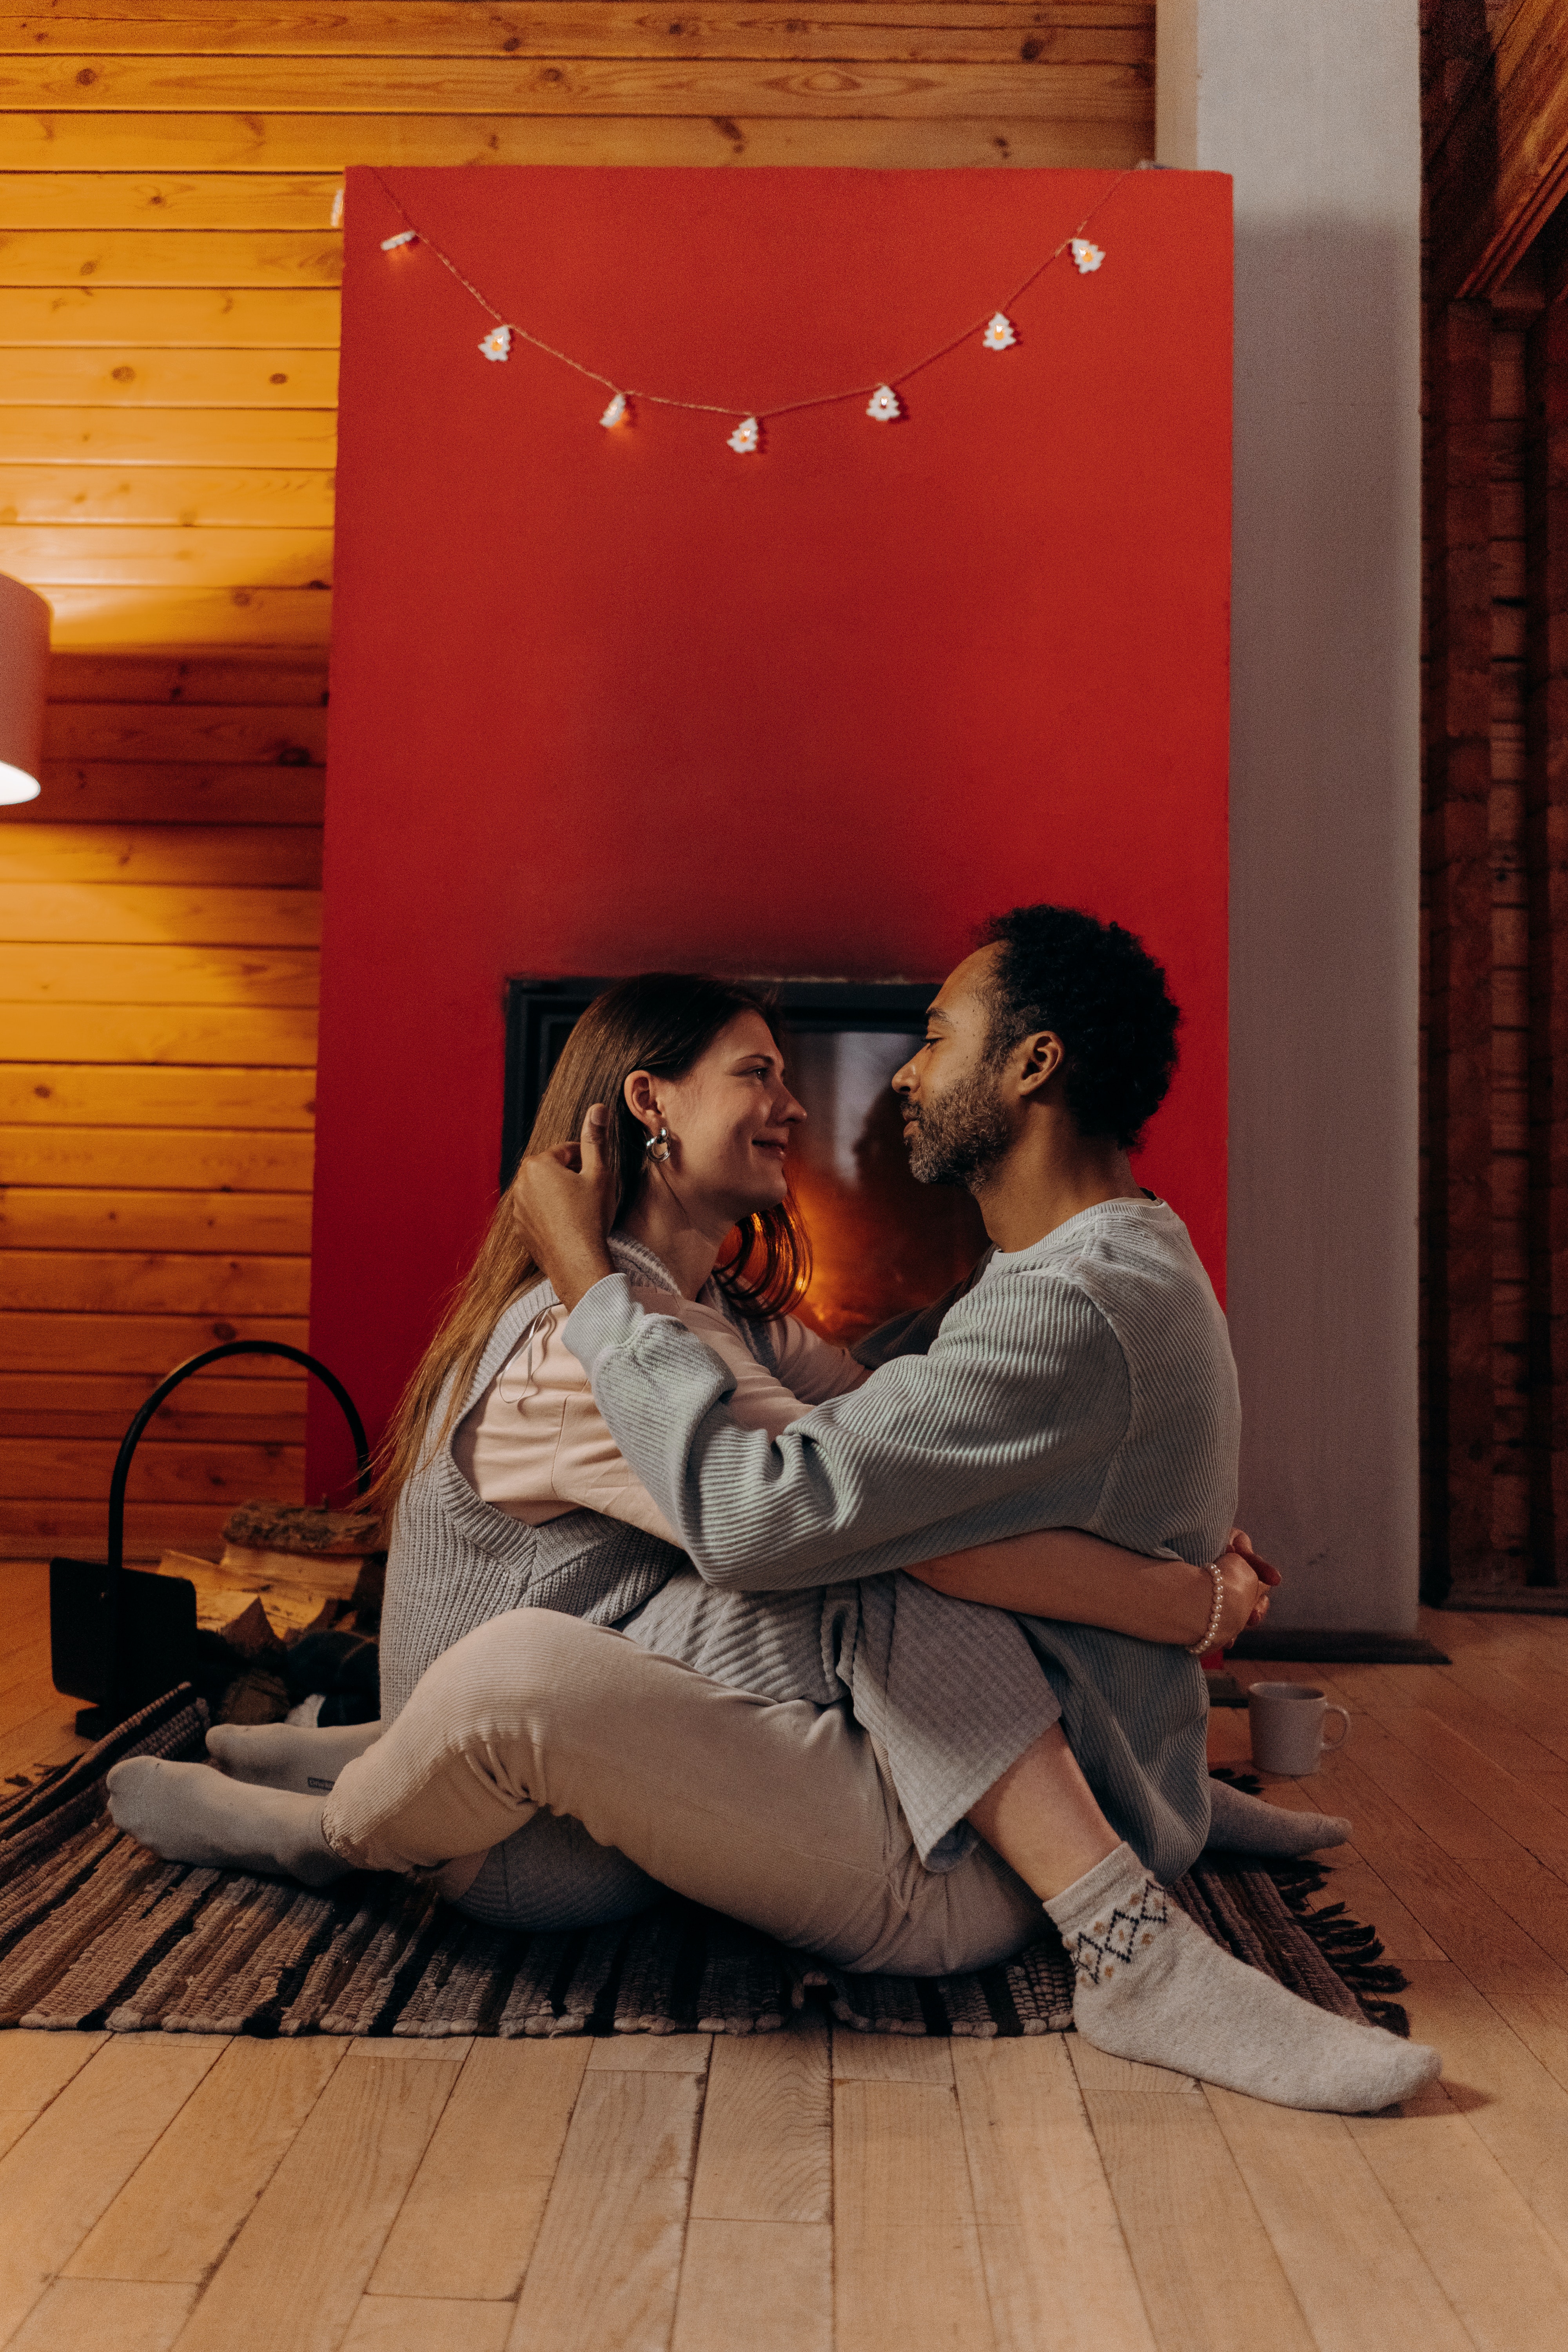 A couple sitting in front of a fire. | Source: Pexels